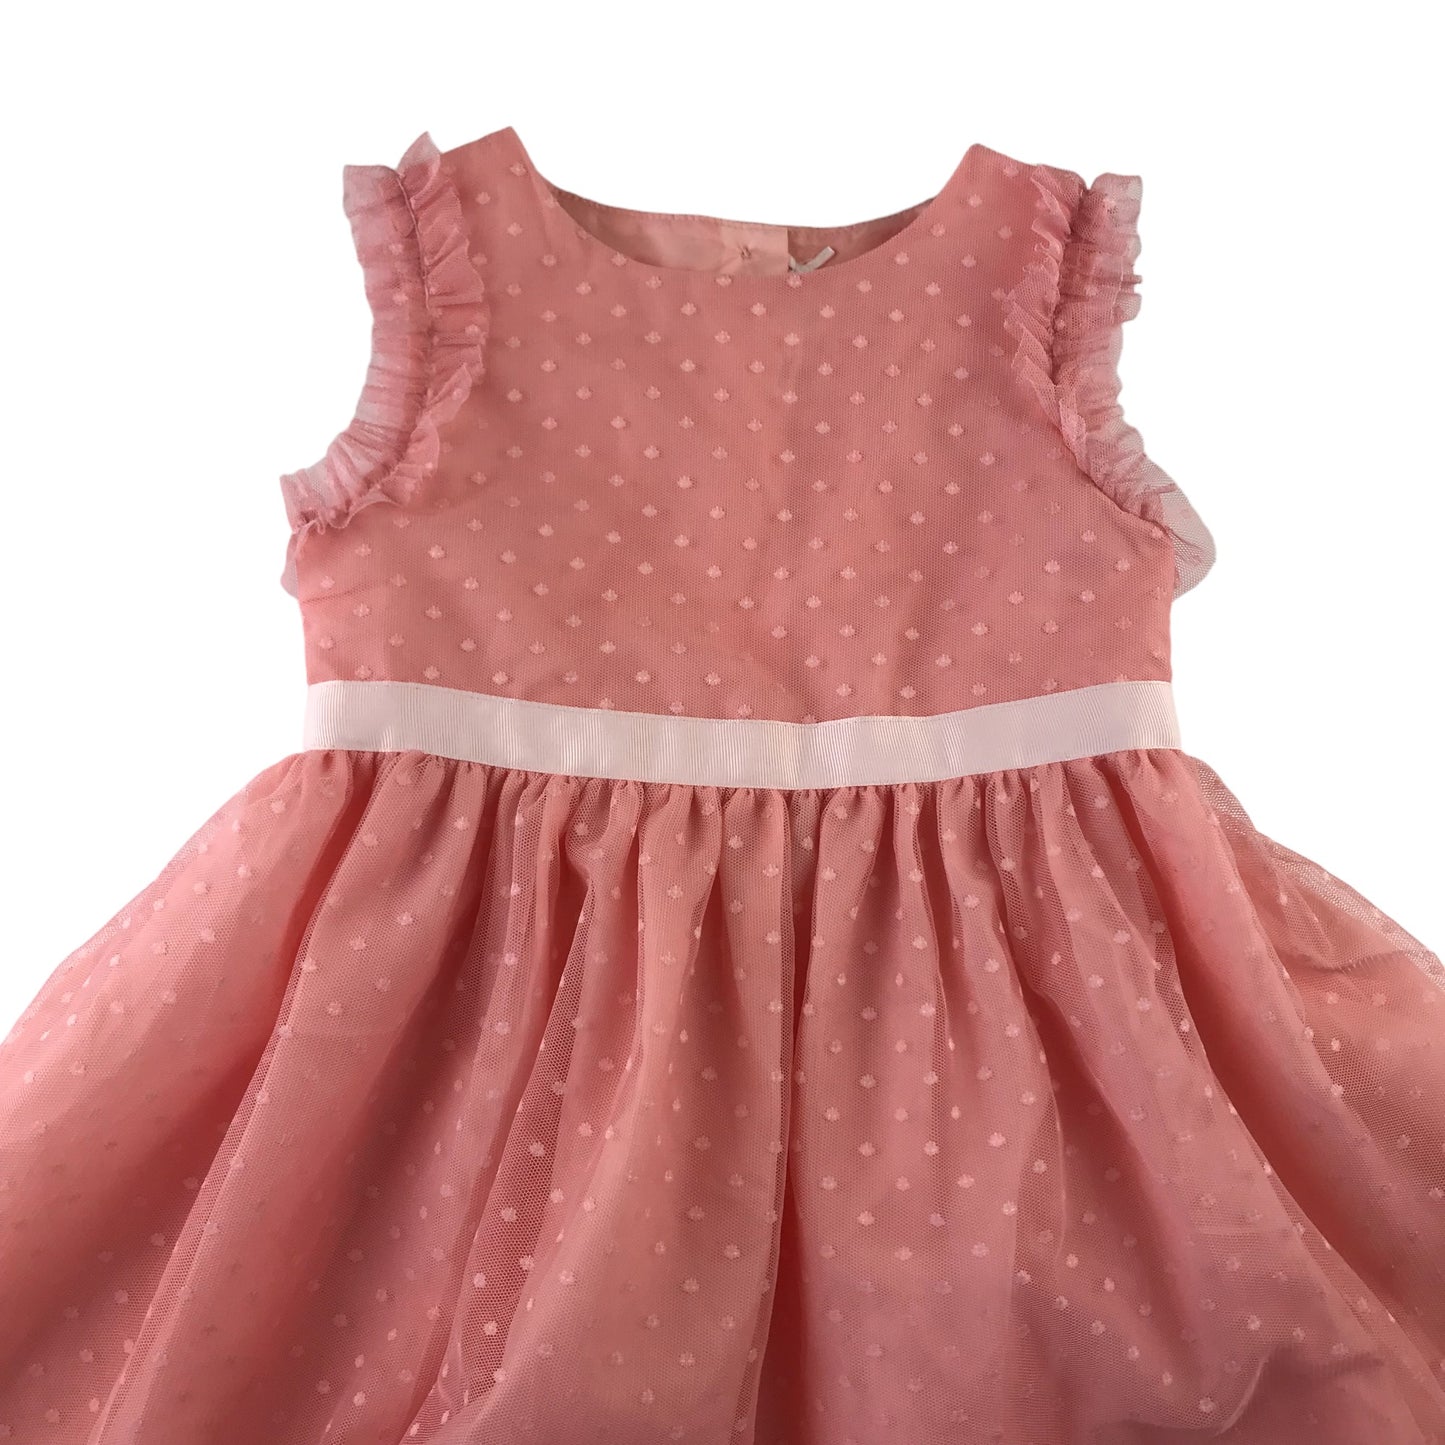 Next dress 4-5 years pink spot pattern tulle mesh layered party